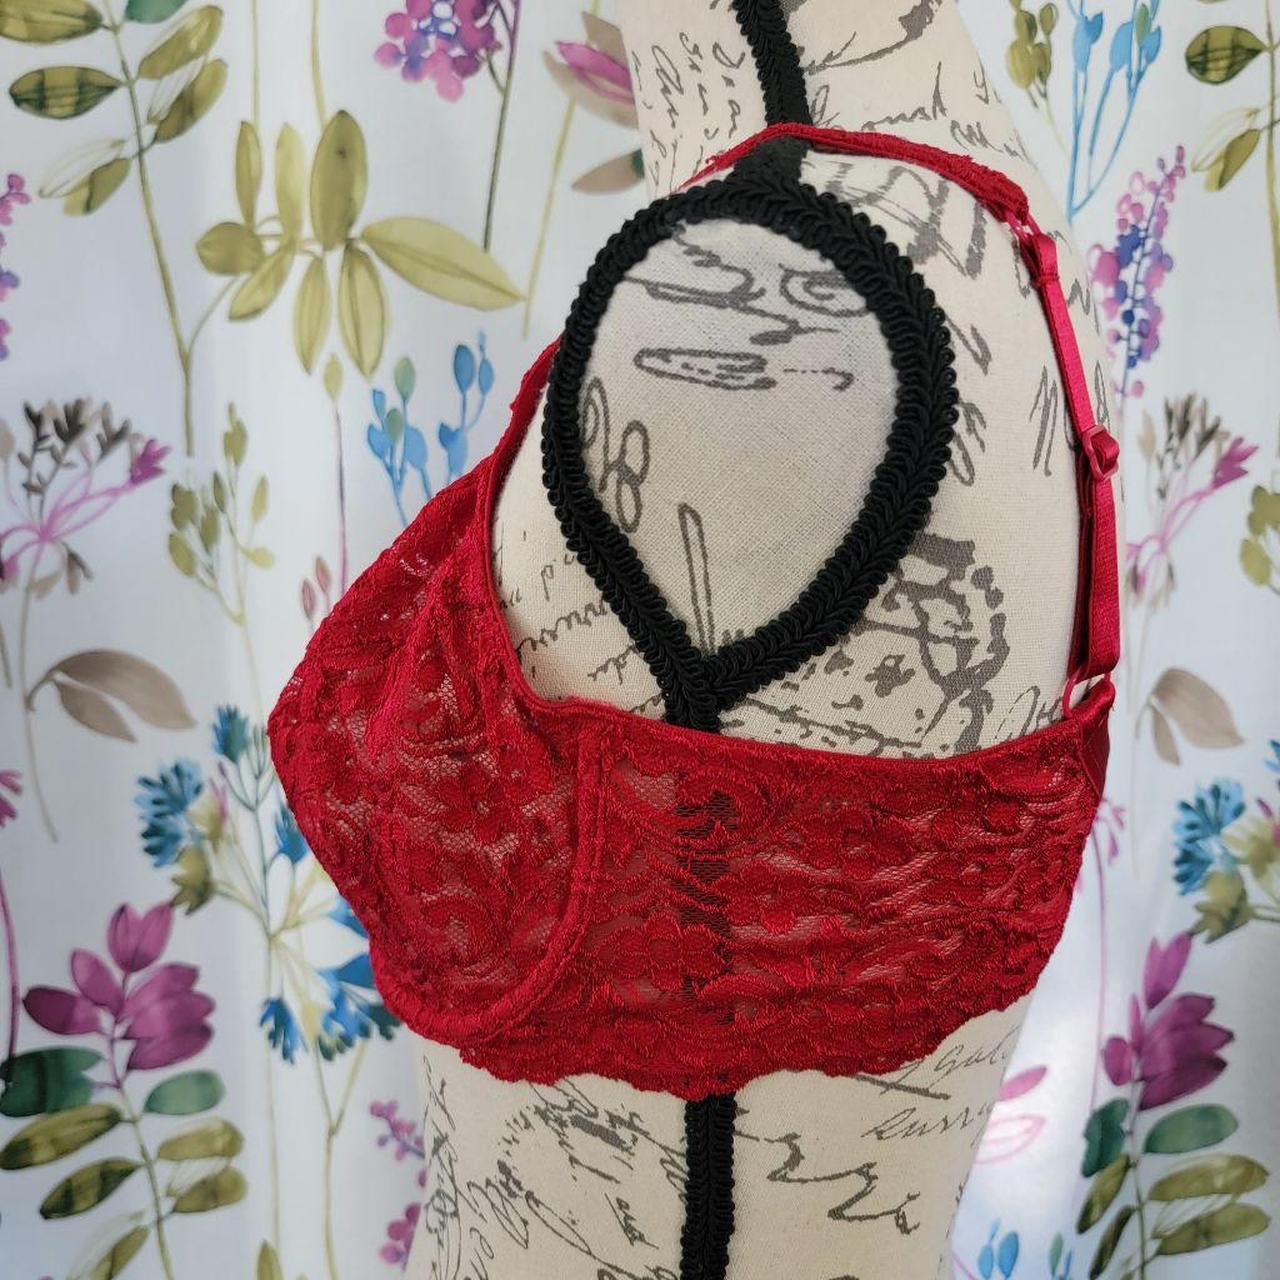 Product Image 4 - Really pretty red bra with